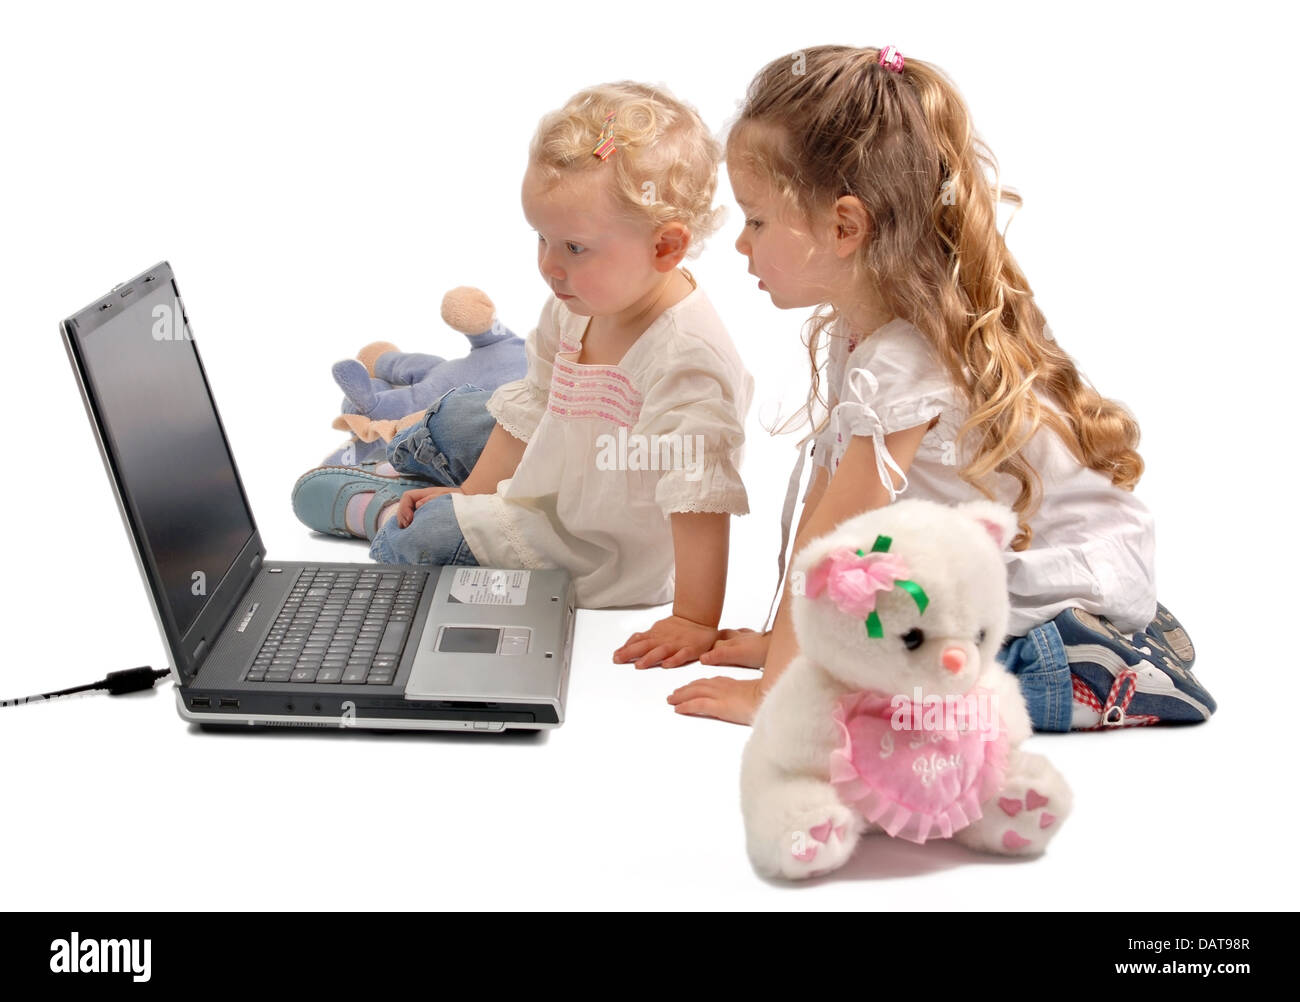 Little girls staring at a notebook computer Stock Photo